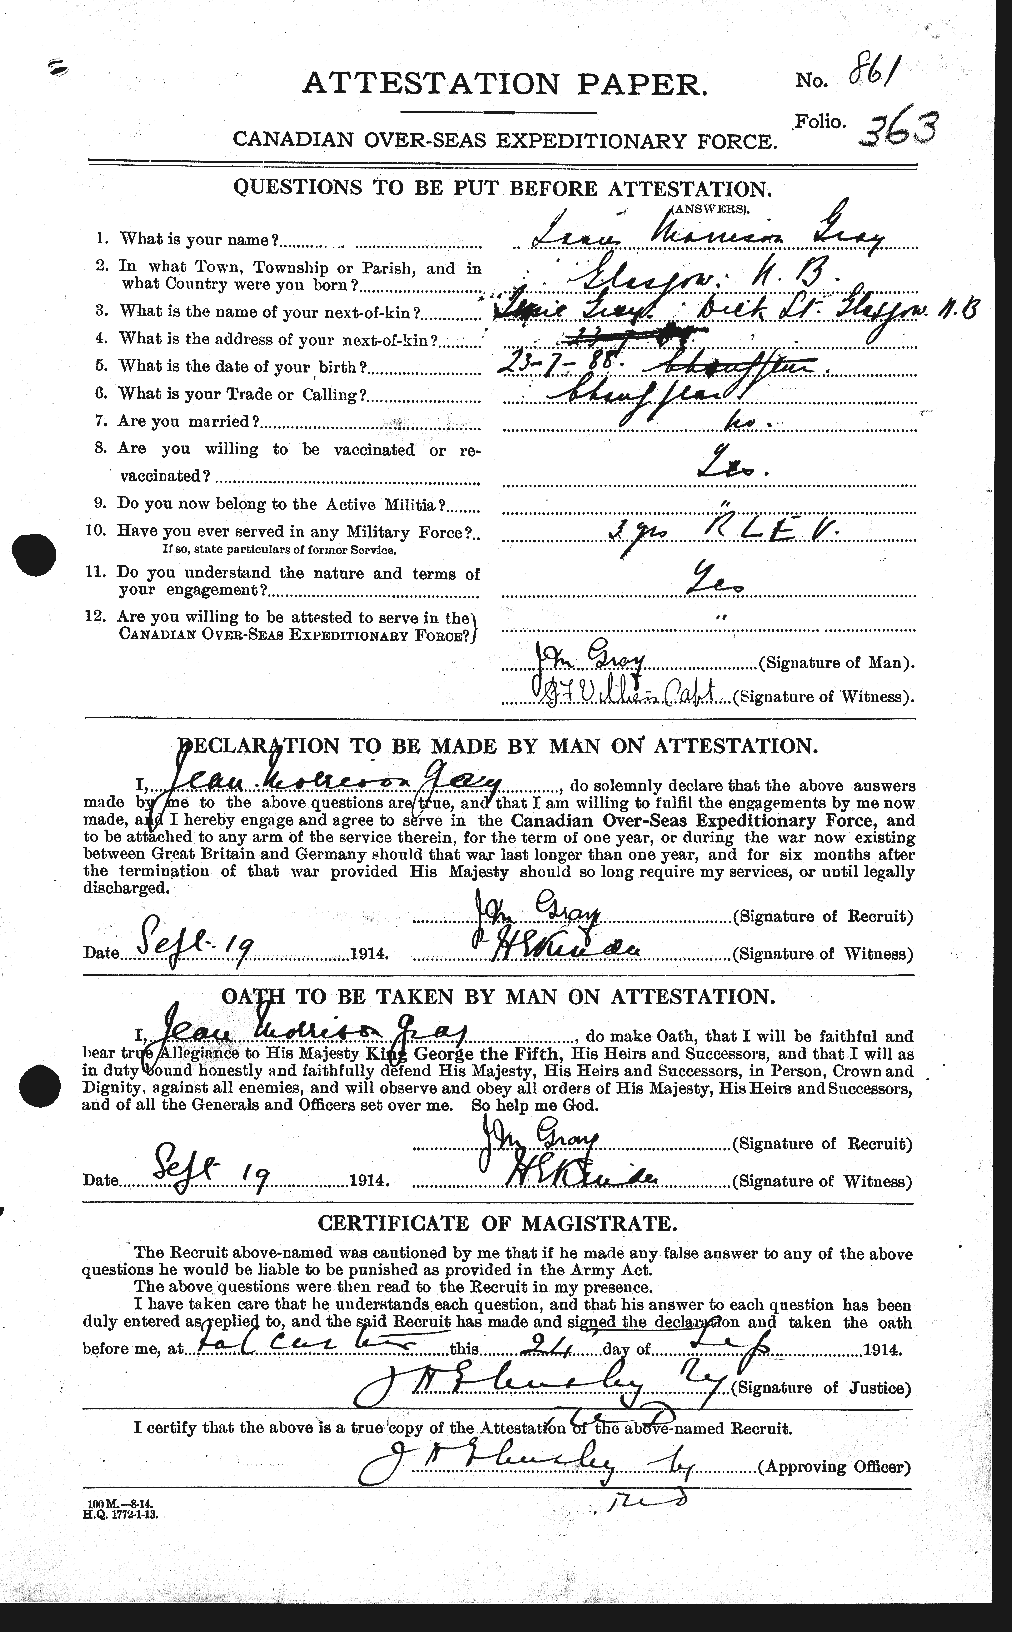 Personnel Records of the First World War - CEF 363304a